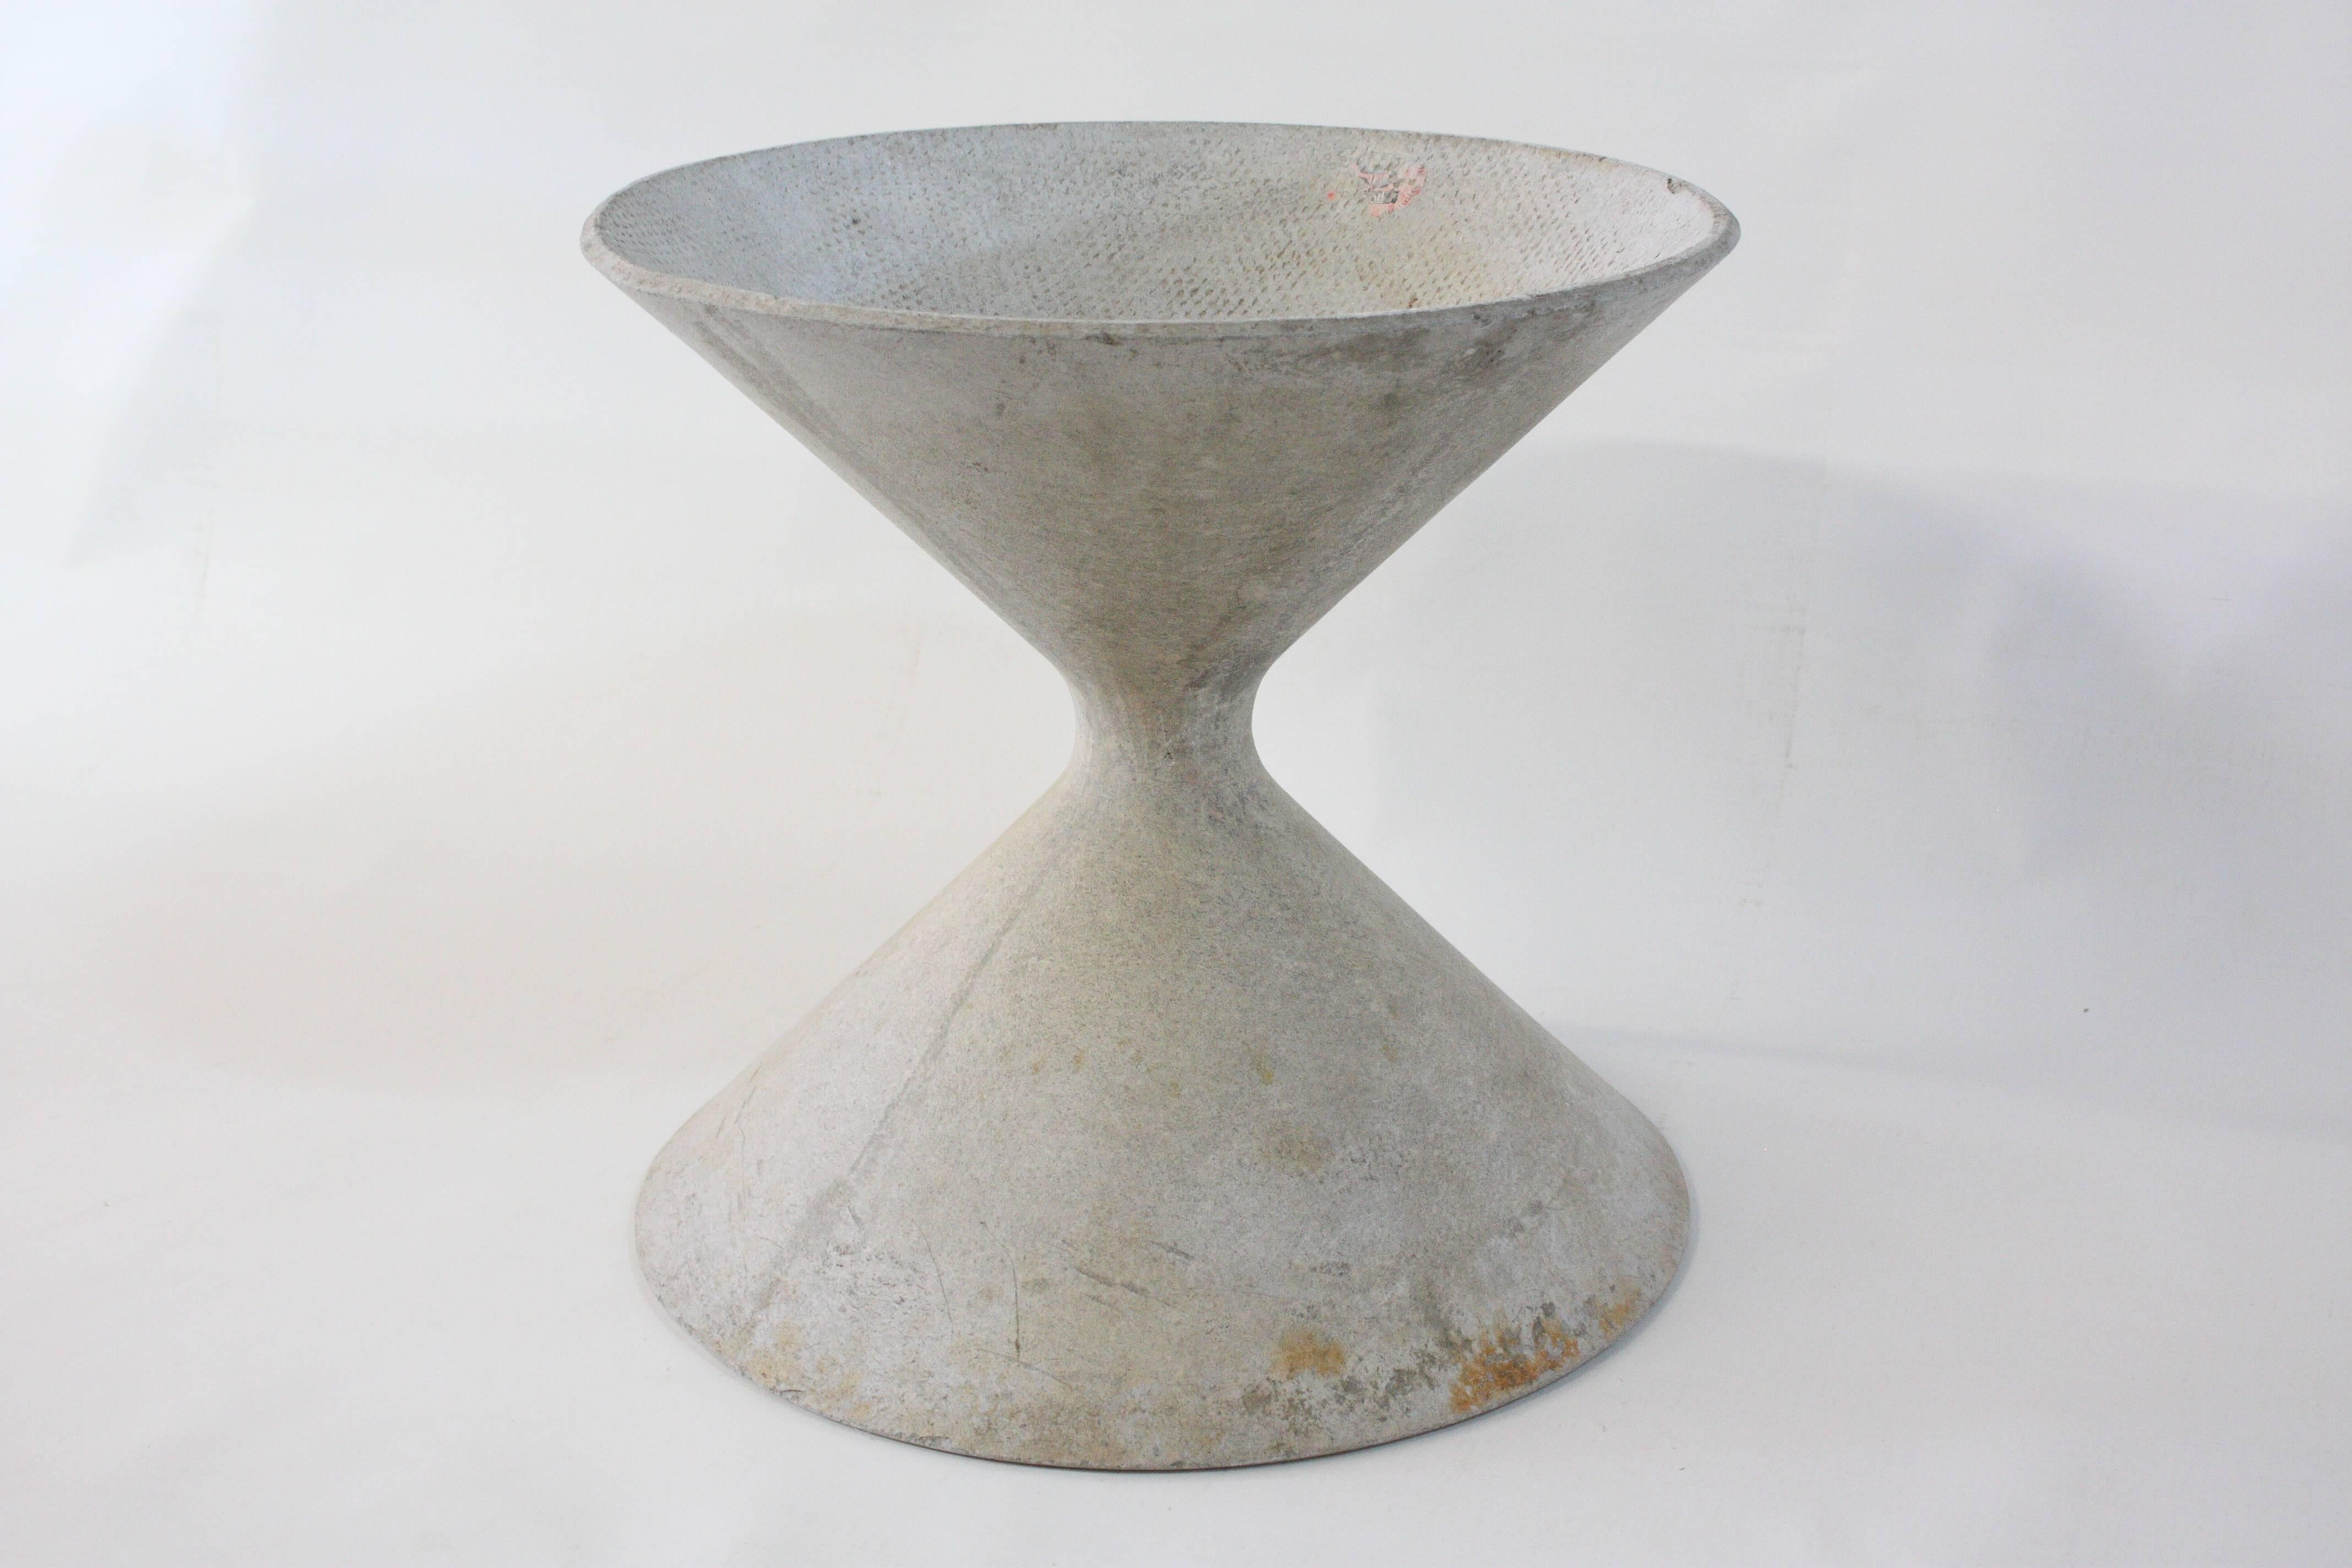 Wonderful fibrous concrete hourglass planter by Willy Guhl.